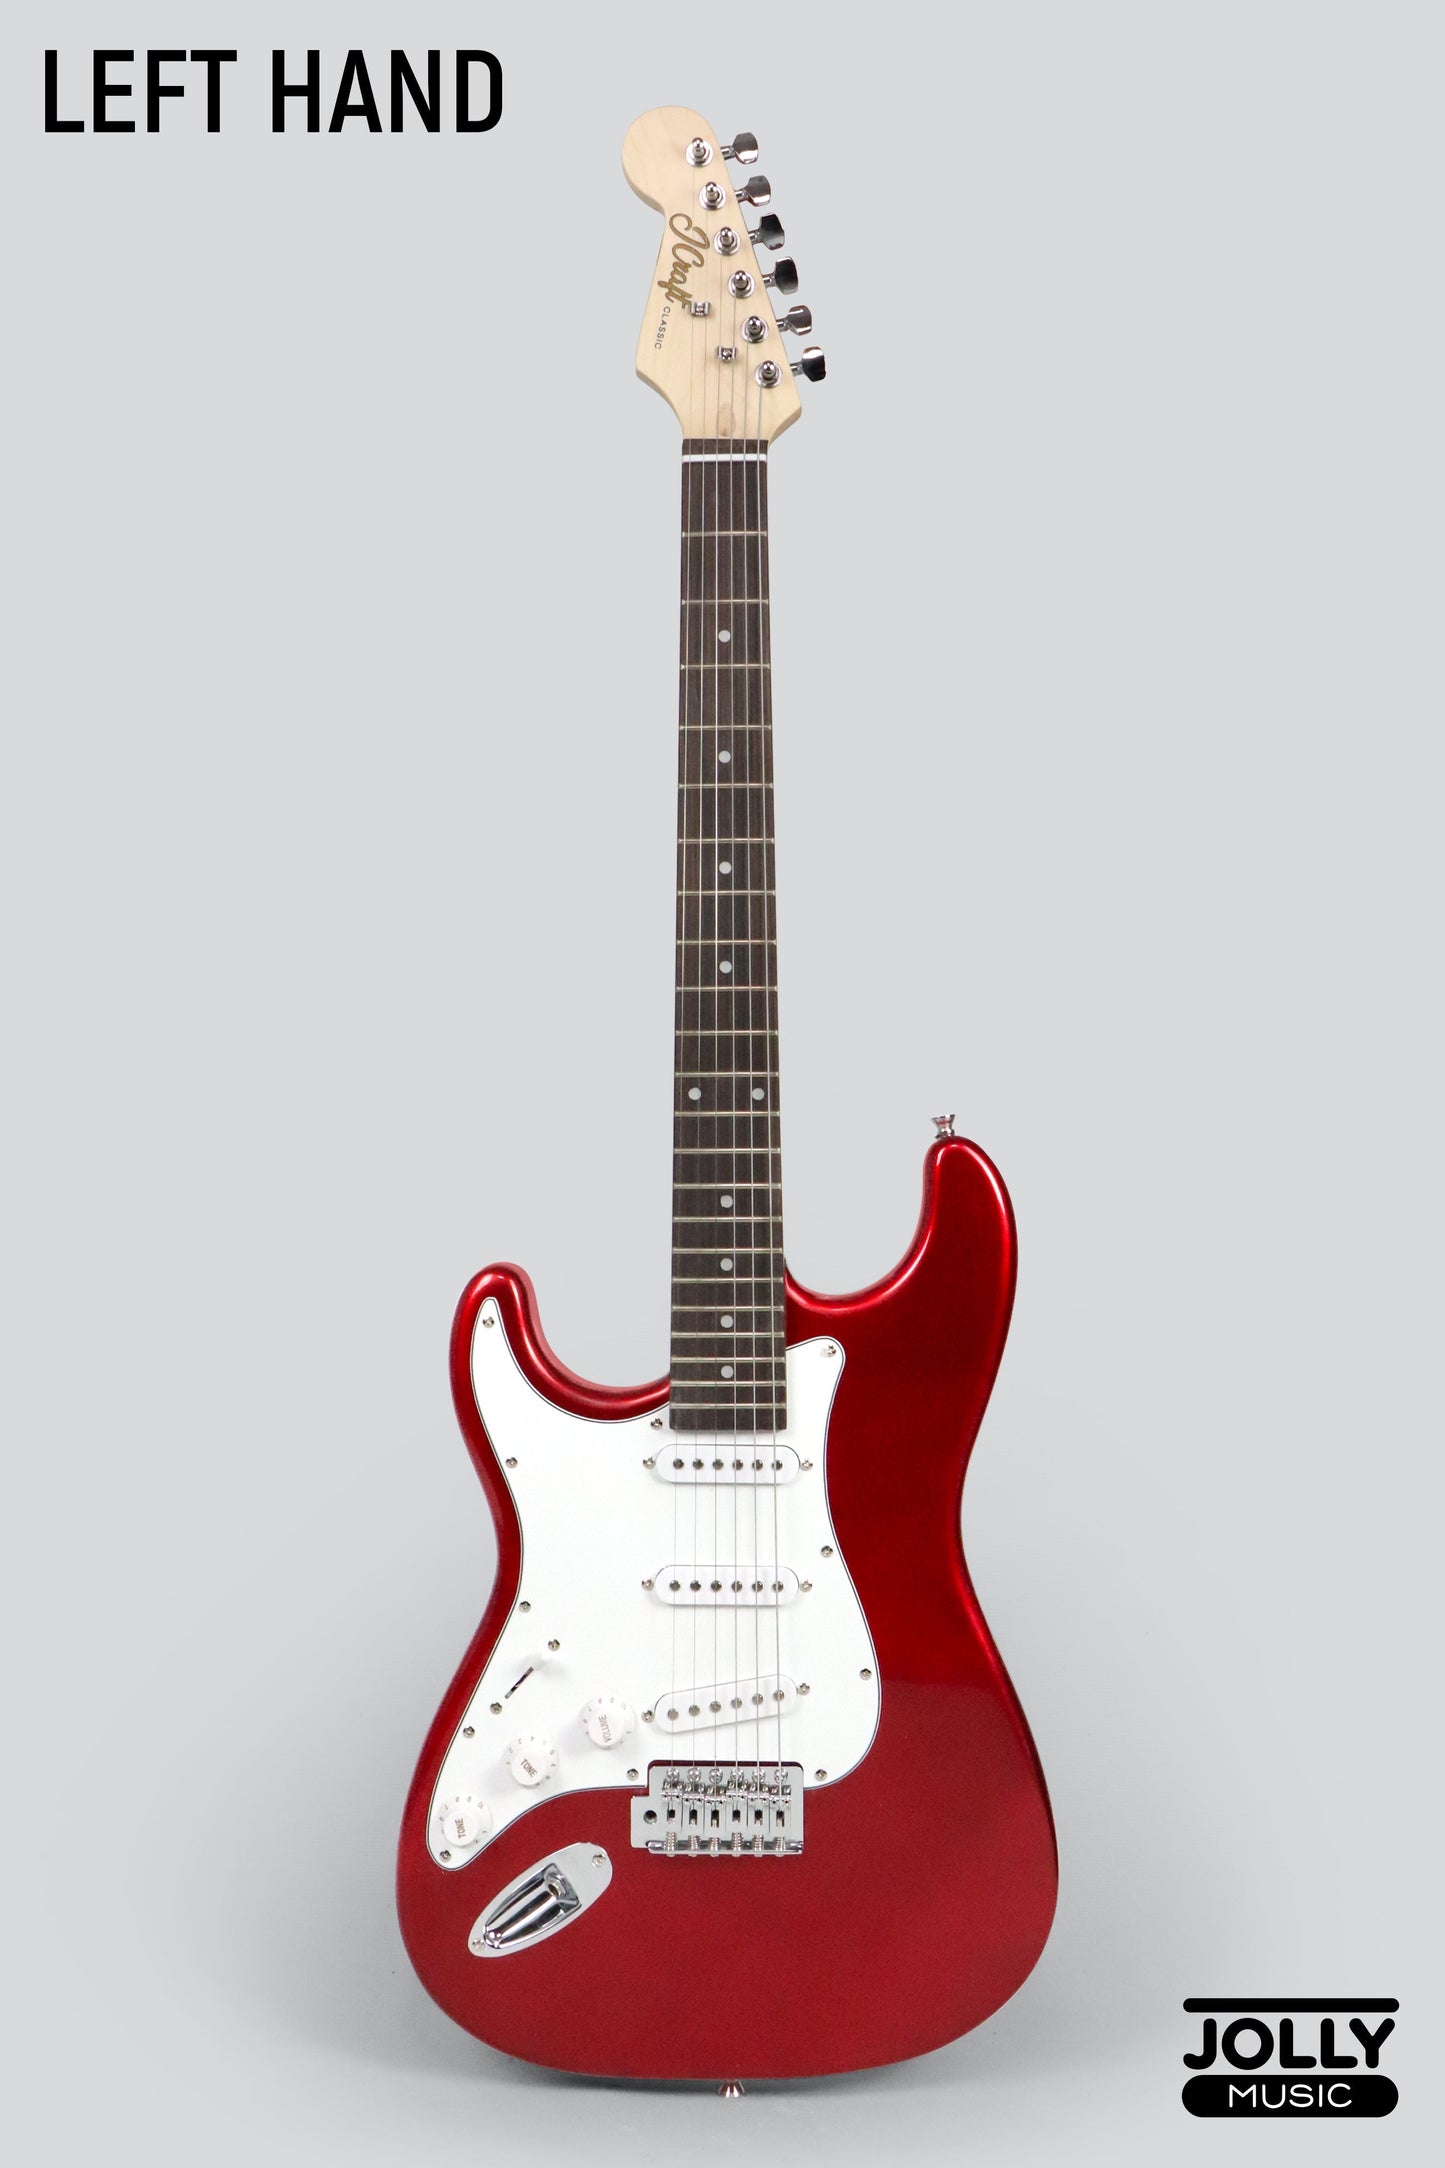 JCraft S-1 LEFT HAND S-Style Electric Guitar with Gigbag - Metallic Red